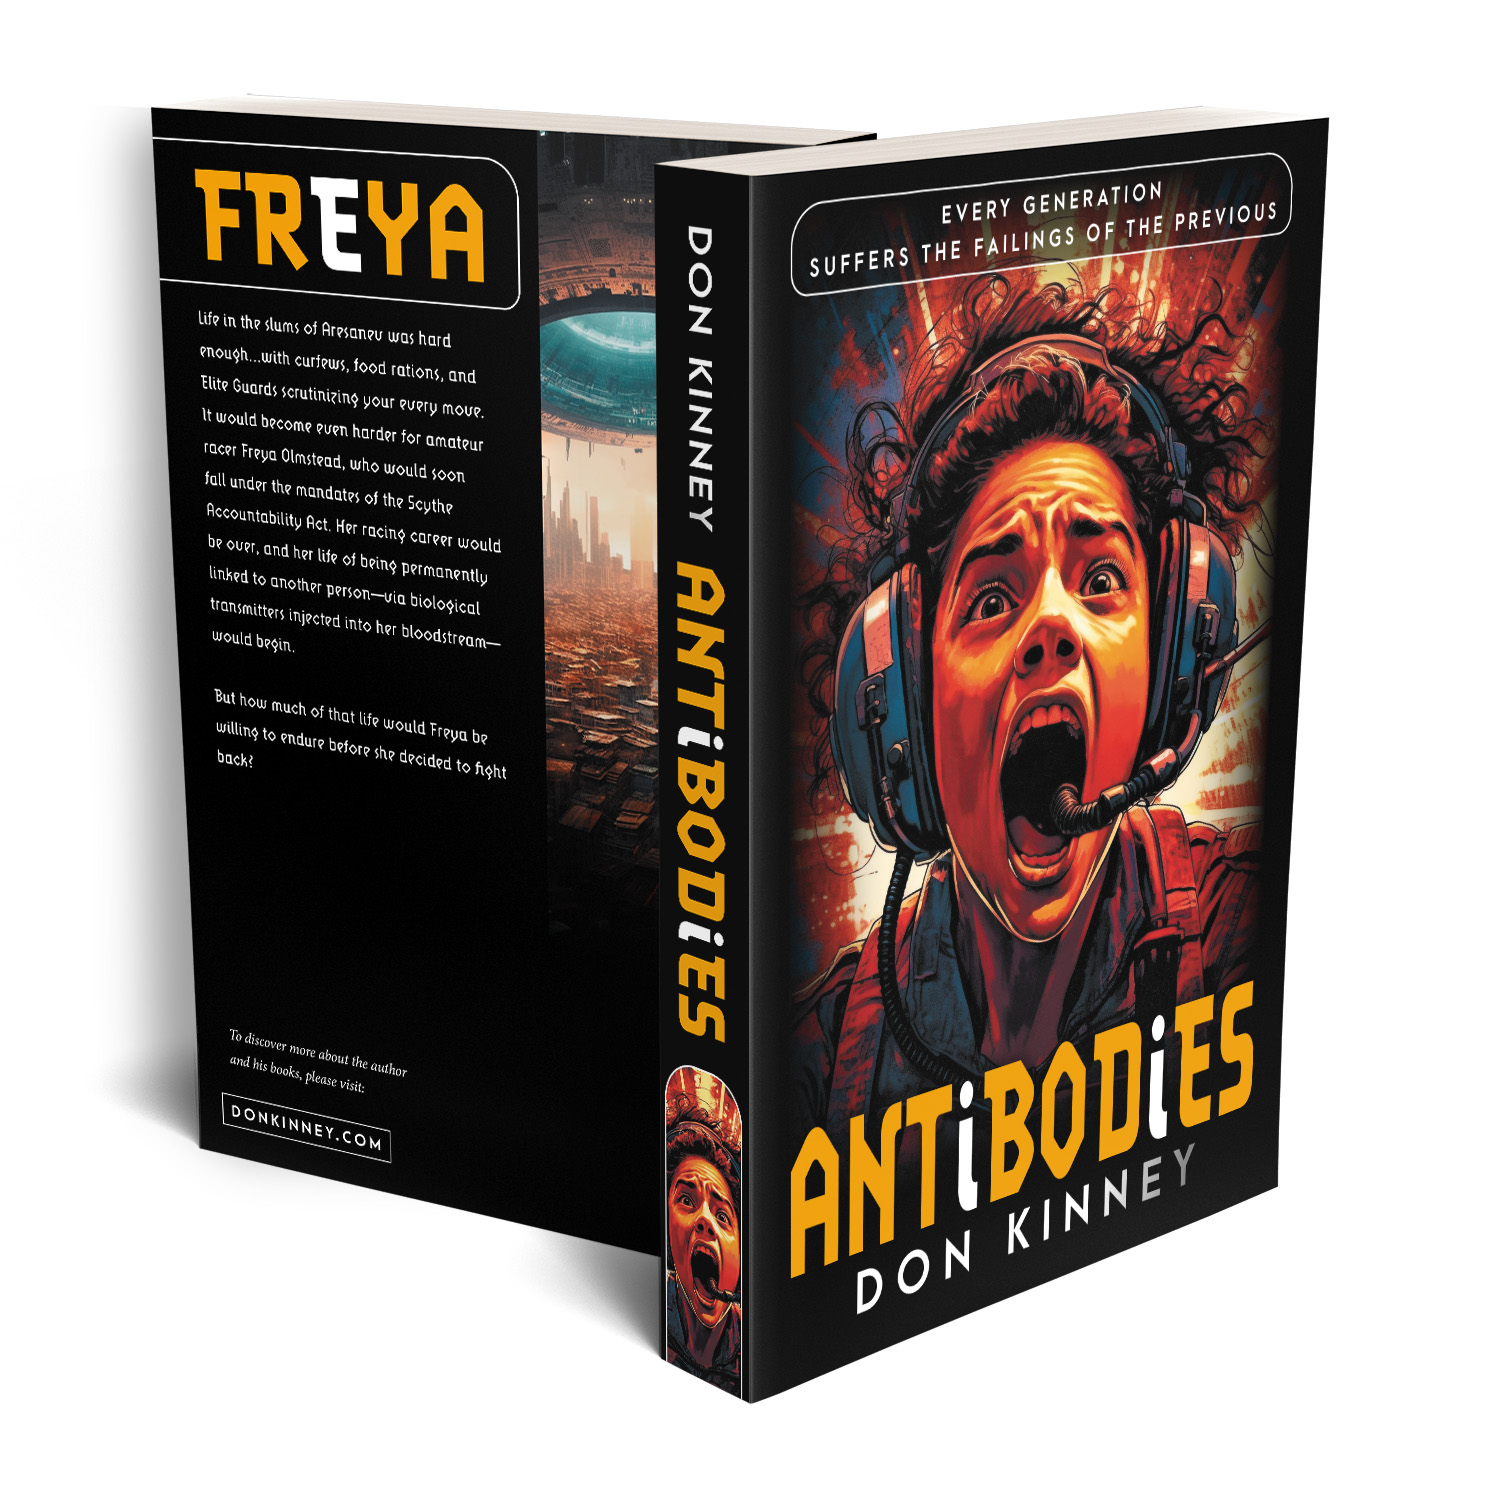 'AntiBodies' is a dark symbiotic science fiction novel. The author is Don Kinney. The book cover design is by Mark Thomas. To learn more about what Mark could do for your book, please visit coverness.com.